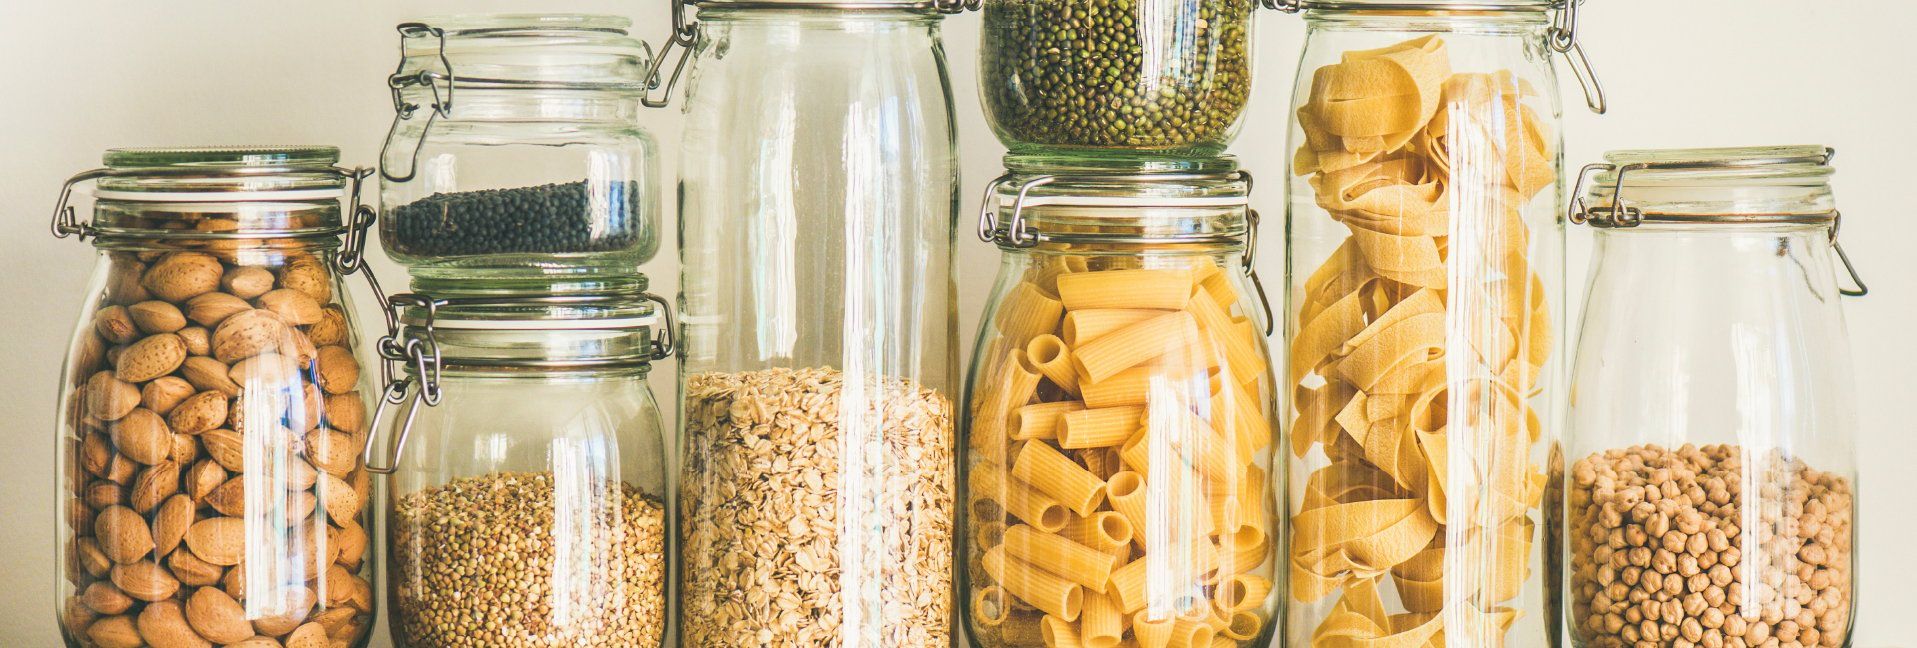 Storing Dry Goods Tips From a Prepper’s Wife